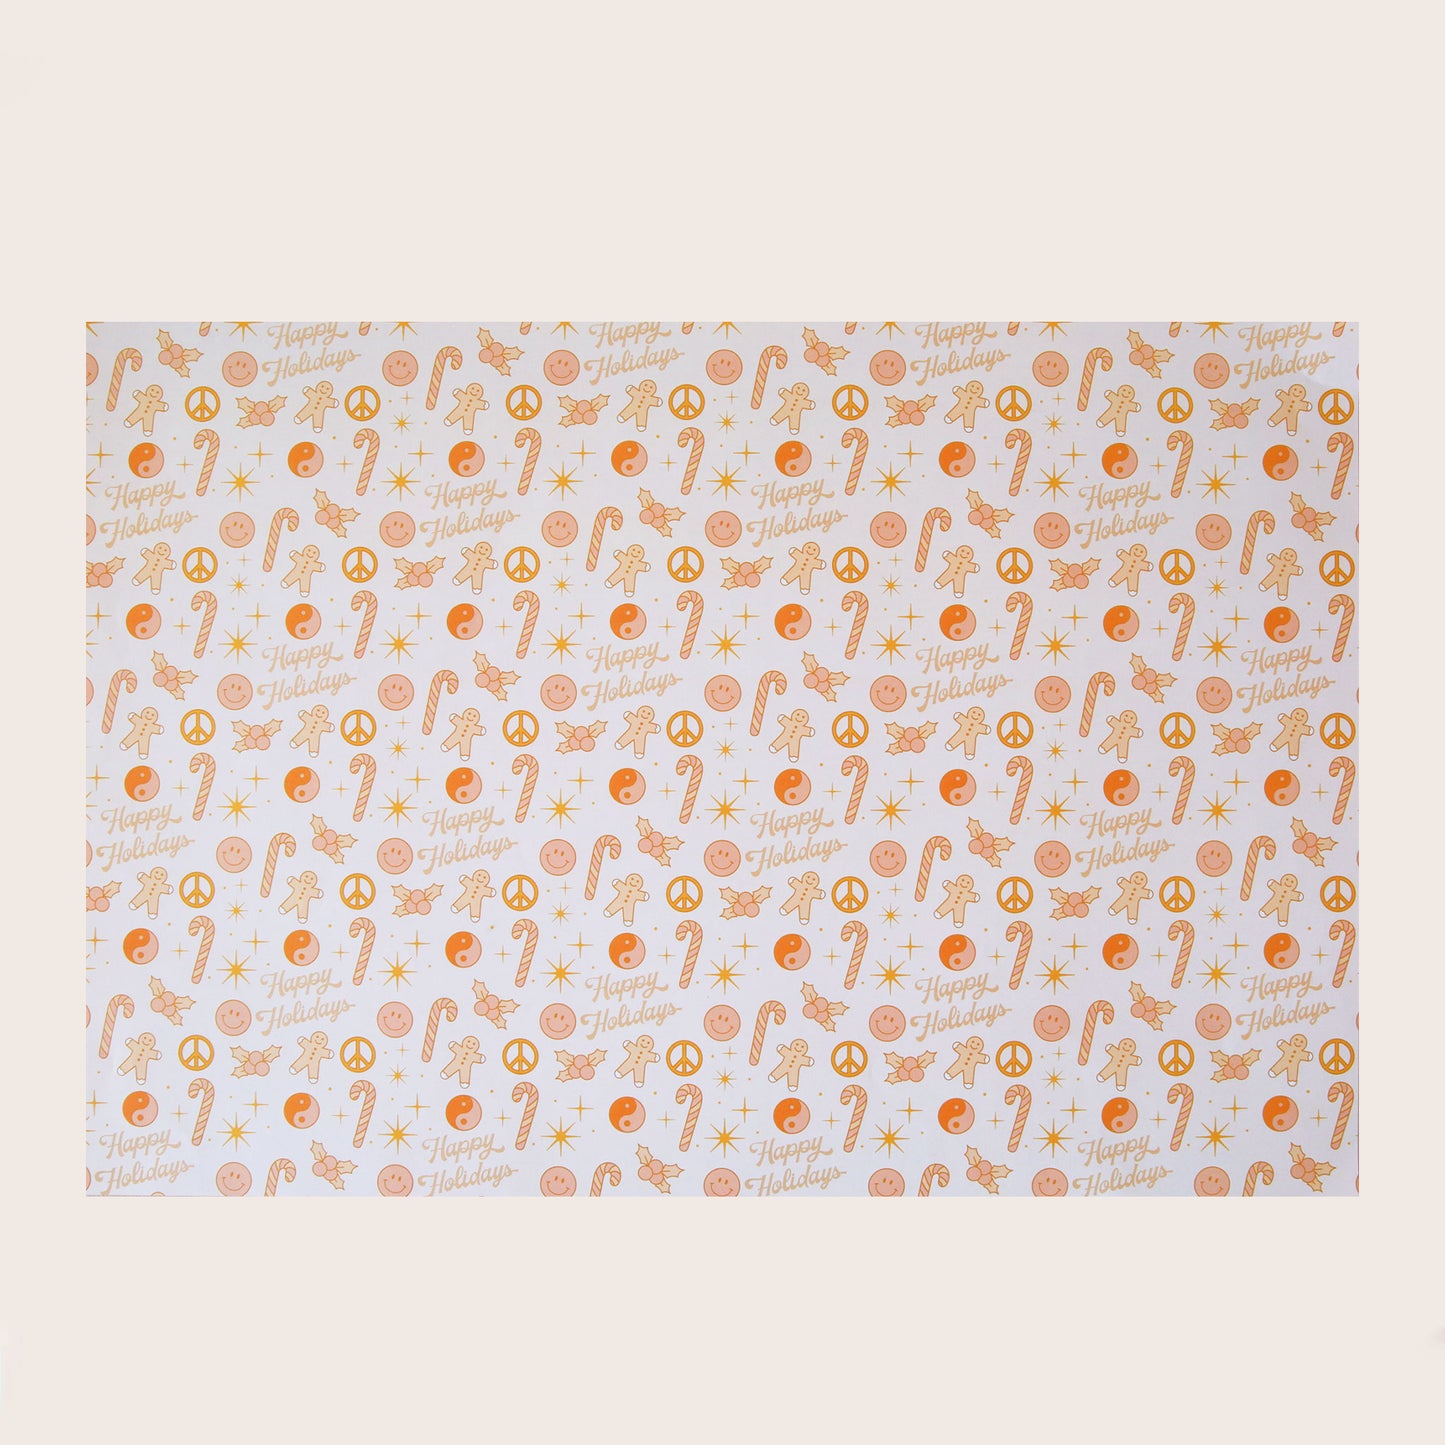 A single sheet of gift wrap with a festive print including gingerbread men, peace signs, candy canes, holly, smiley faces, and dainty "Happy Holidays". The gift wrap is reversible and the side with the print is on a white background while the symbols are shades of pink and orange and the reversible side features a salmon color background and various white stars and twinkle symbols.